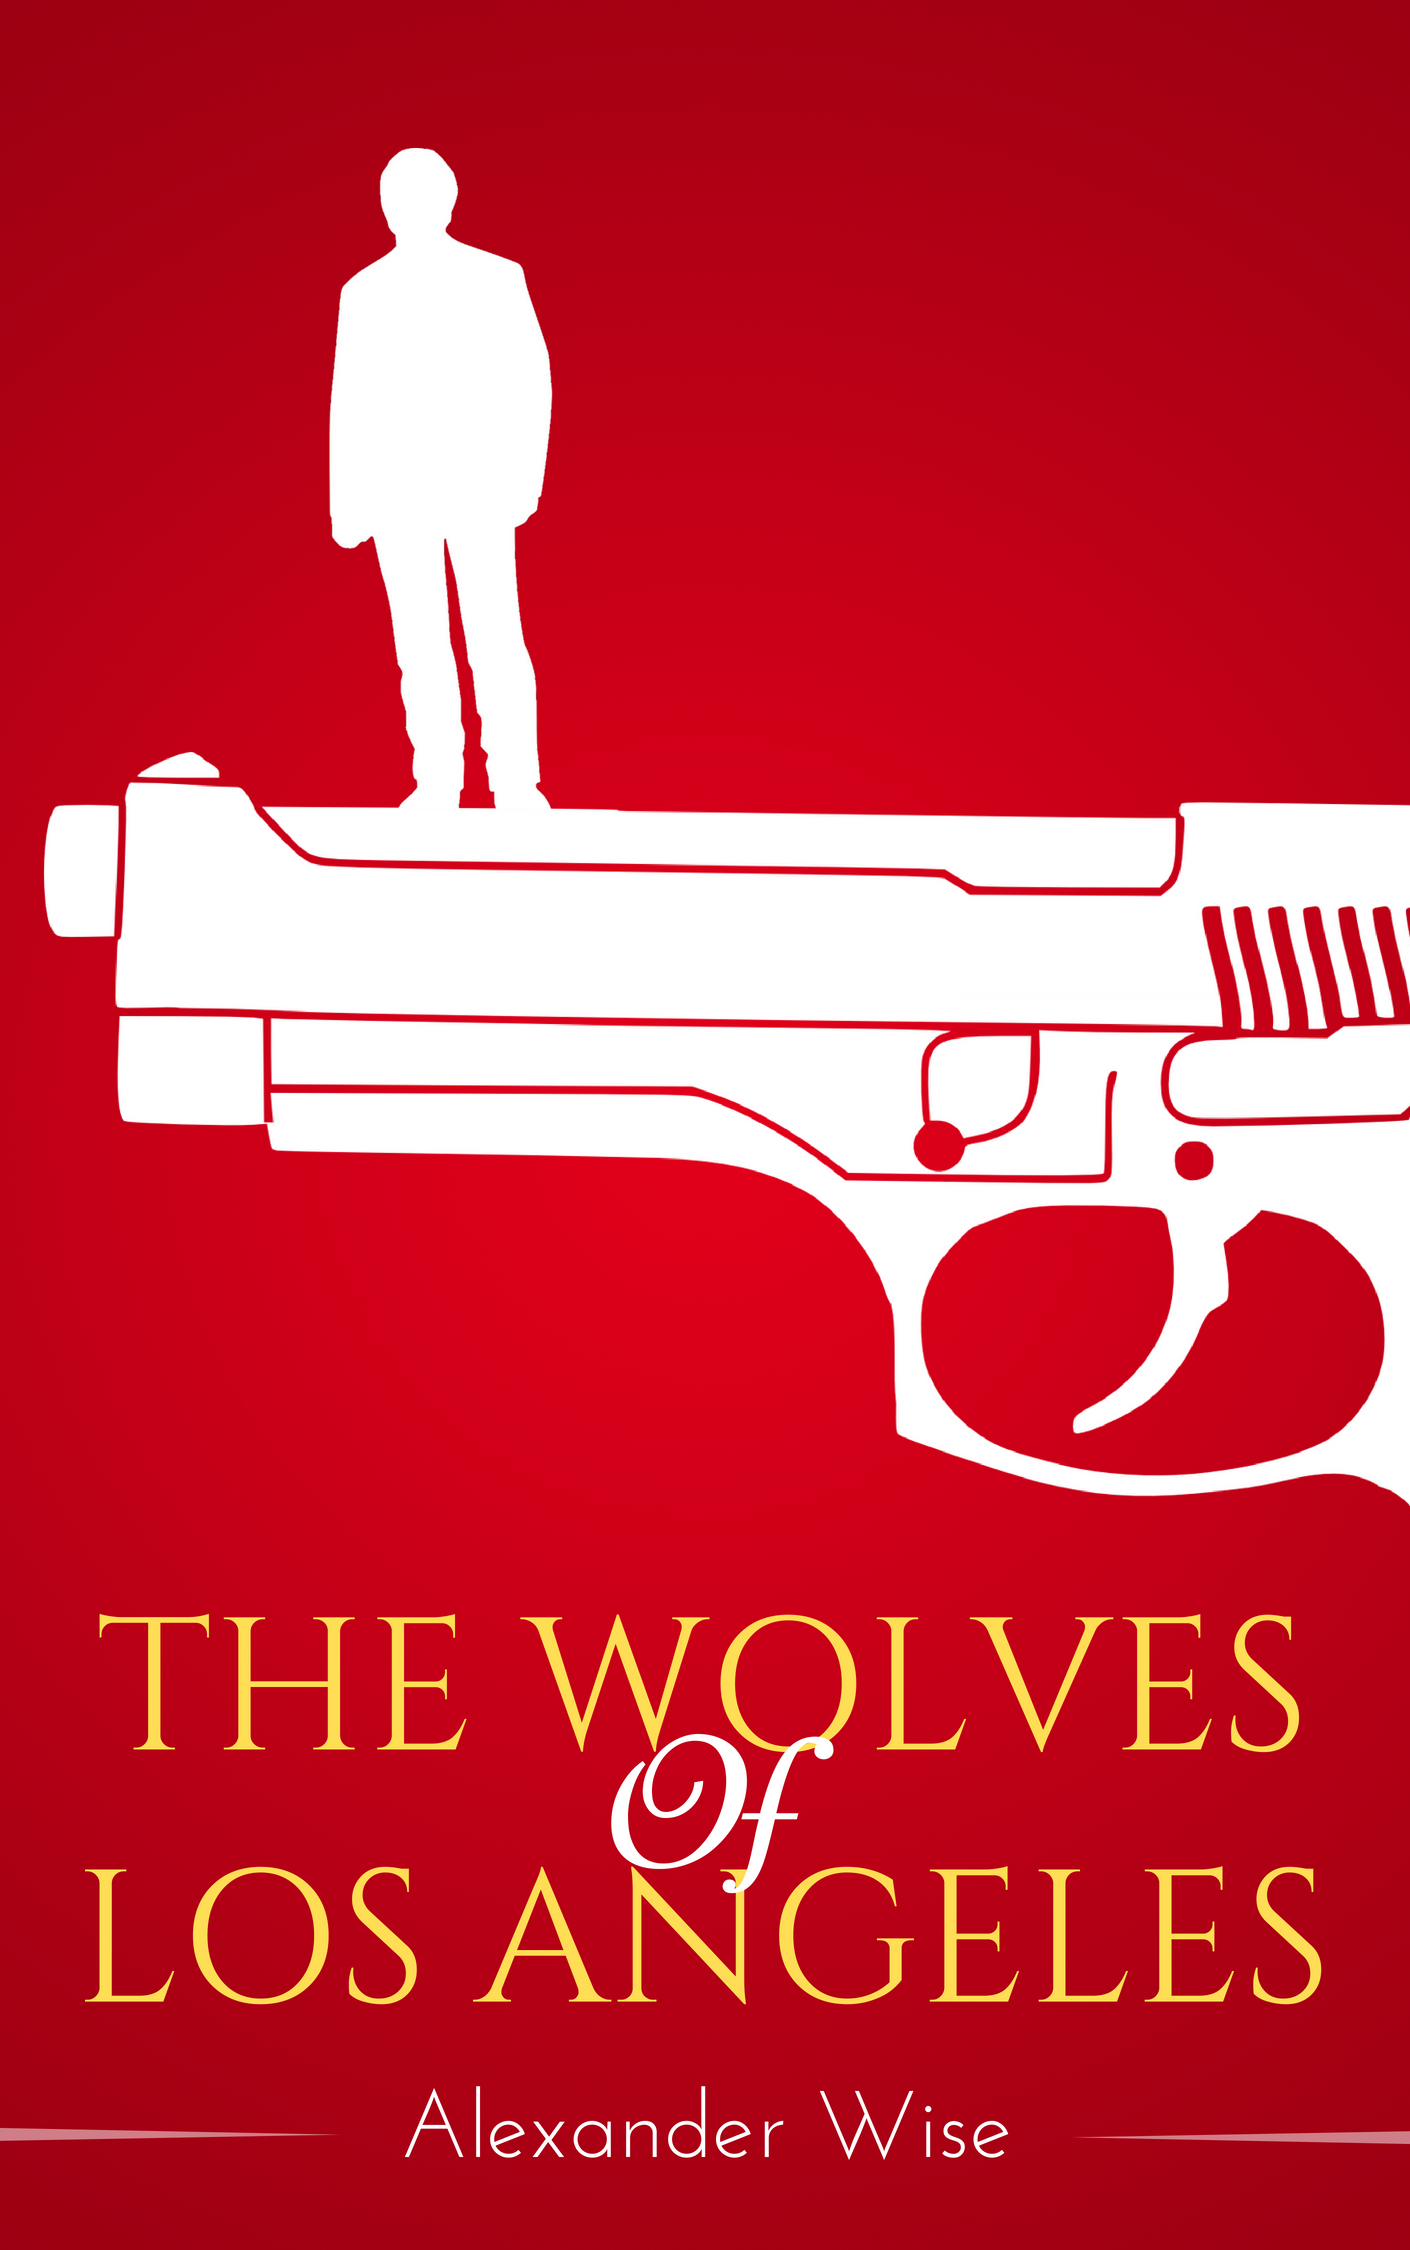 FREE: The Wolves of Los Angeles by Alexander Wise